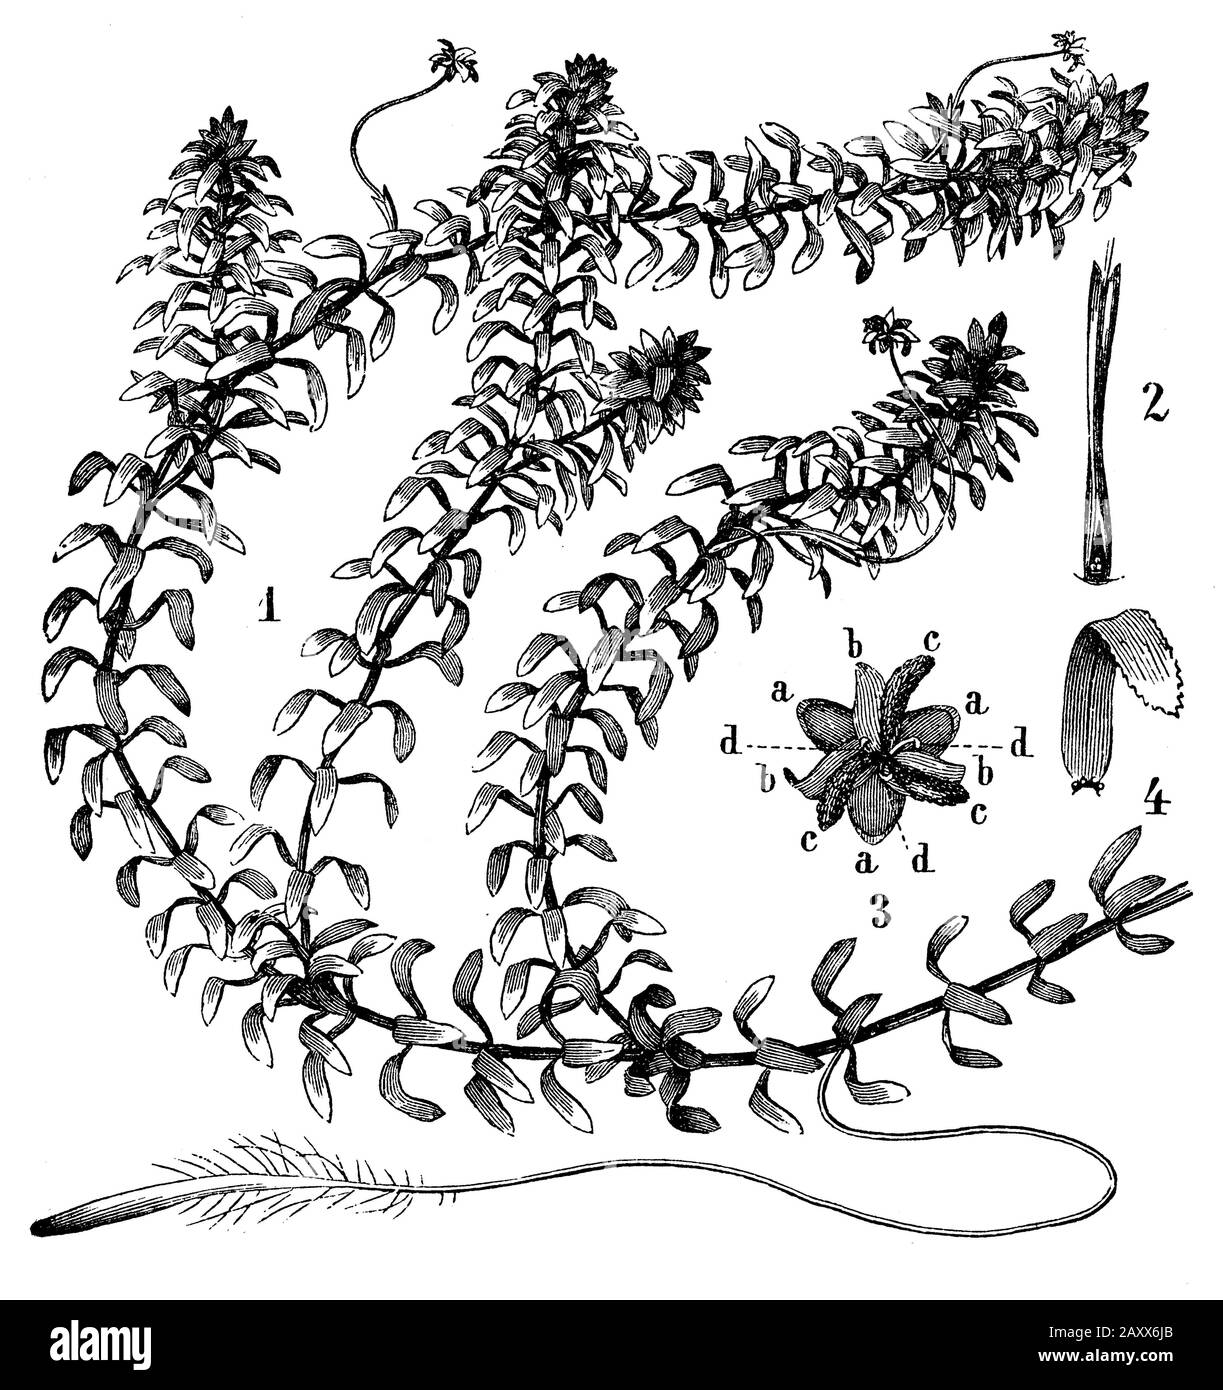 American waterweed, Elodea canadensis, anonym (biology book, 1878) Stock Photo